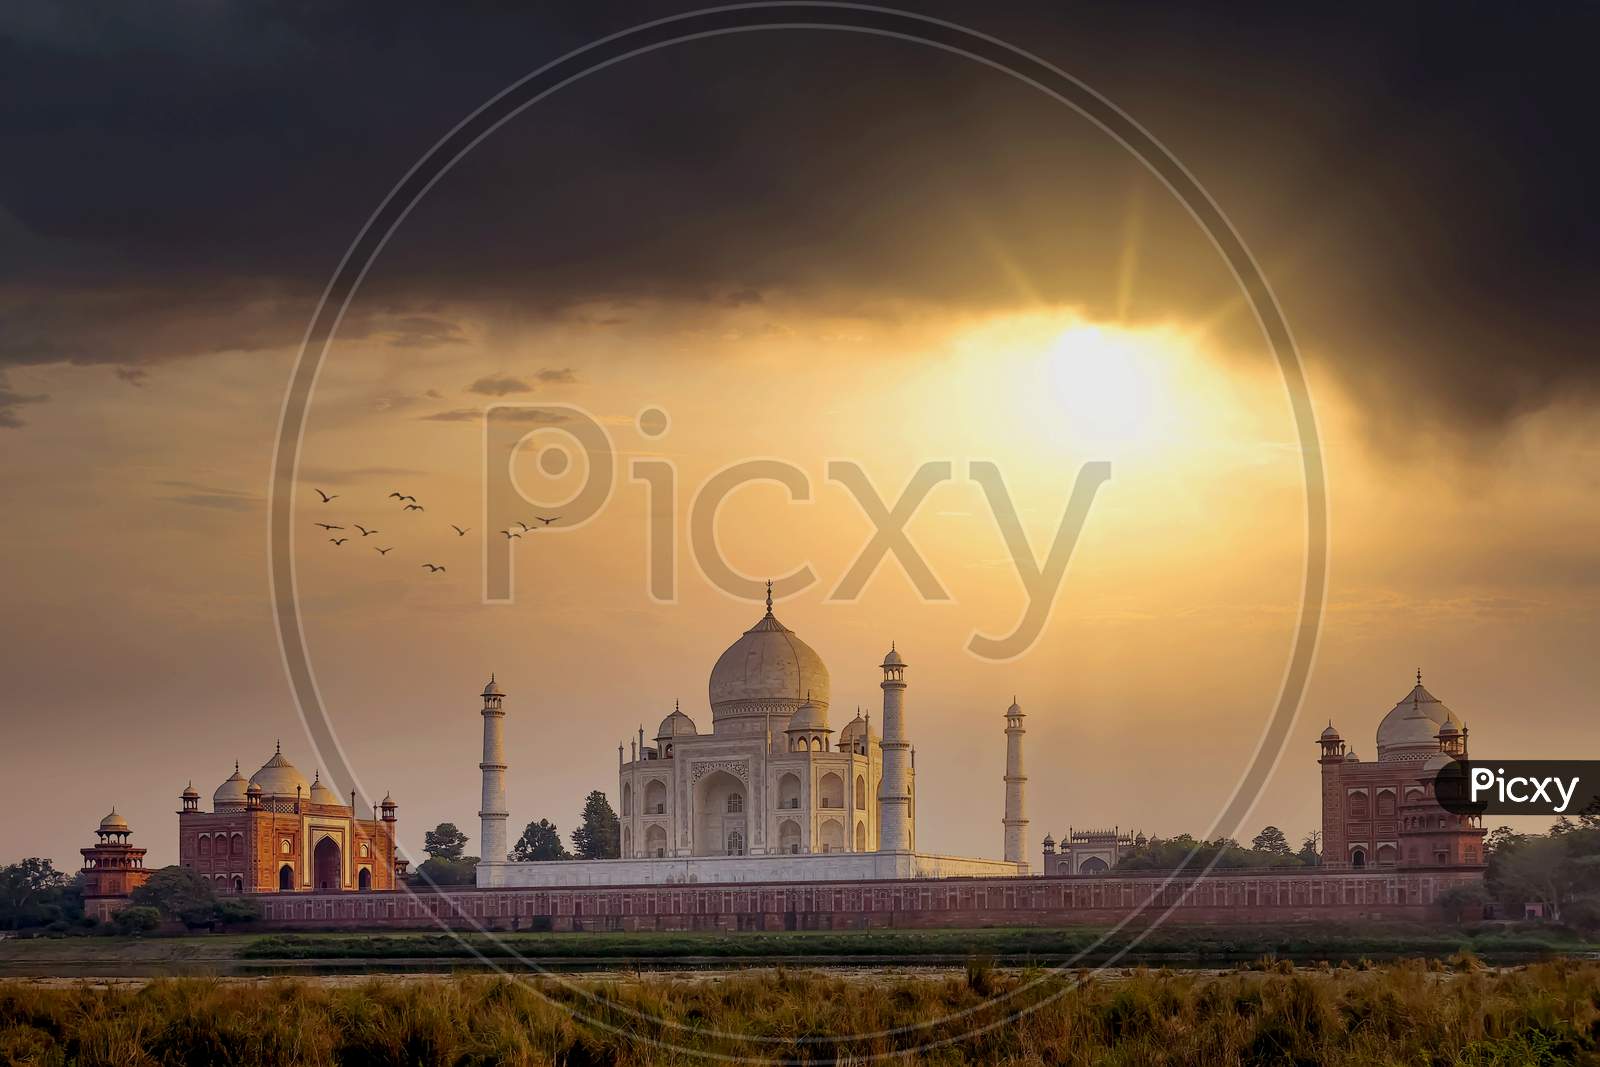 The white marble Taj Mahal building in a golden sunset as seen from across the Yamuna river in Agra, India.